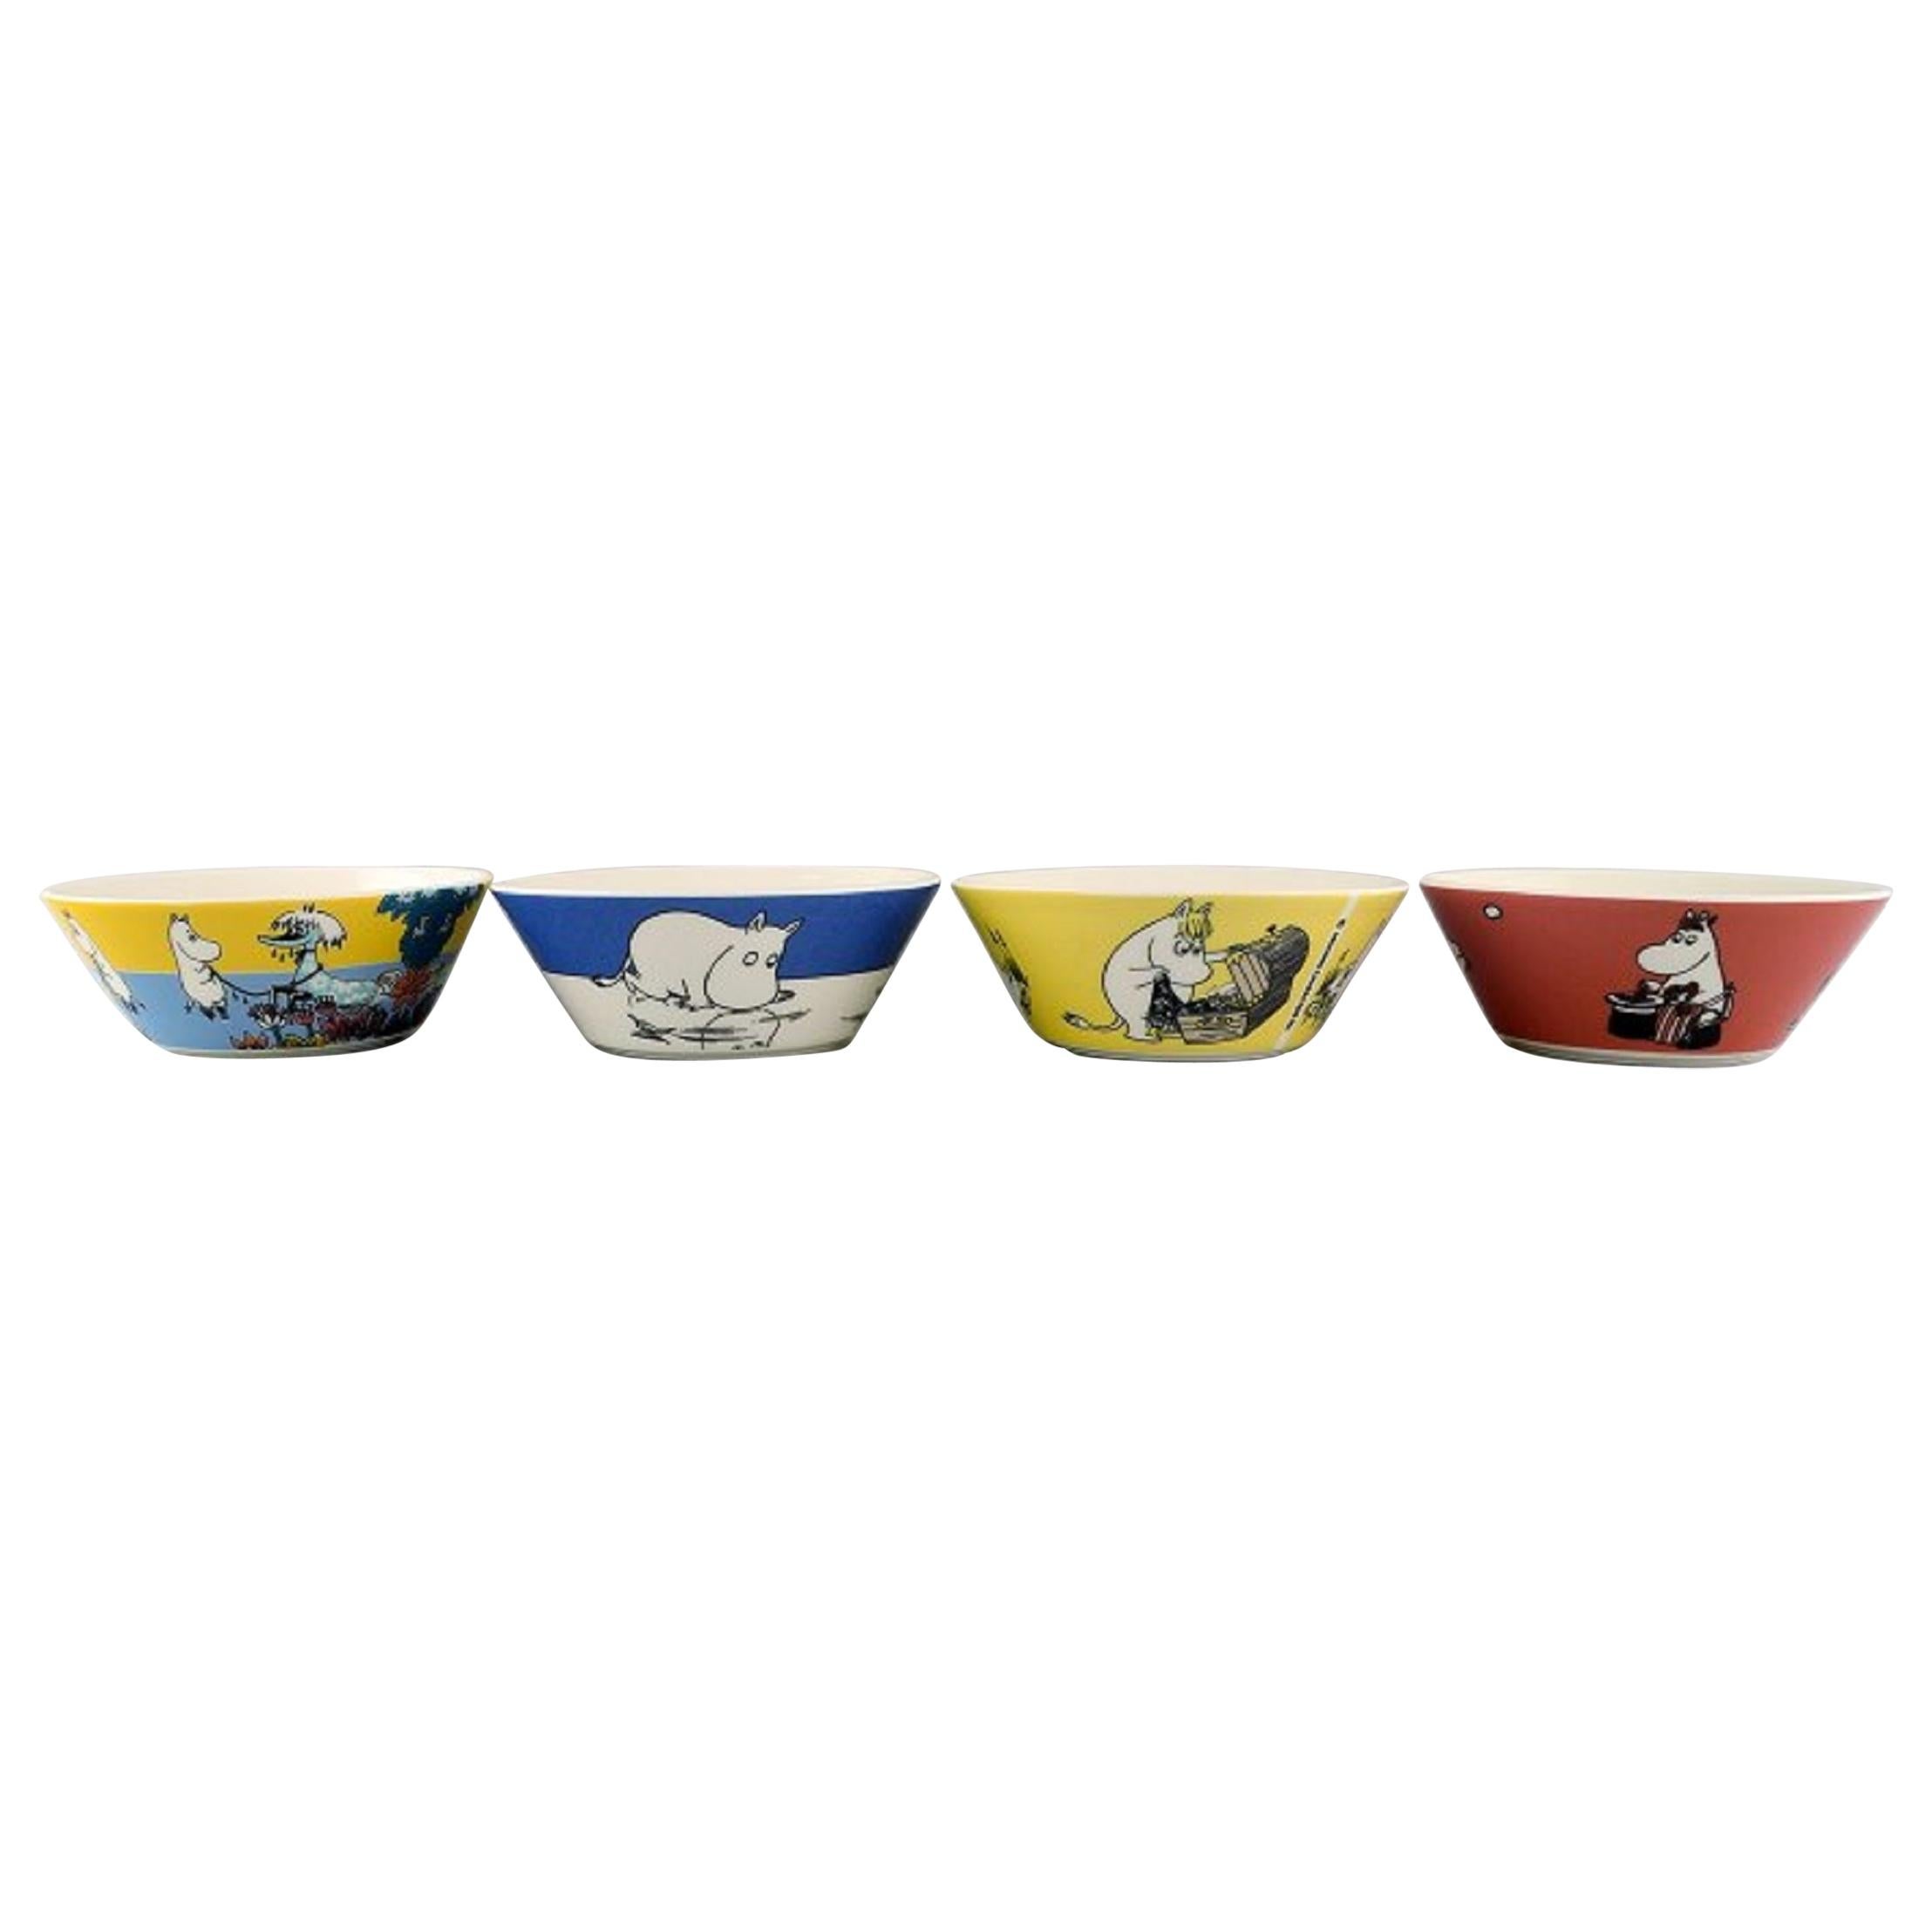 Arabia, Finland, Four Porcelain Bowls with Motifs from "Moomin" For Sale